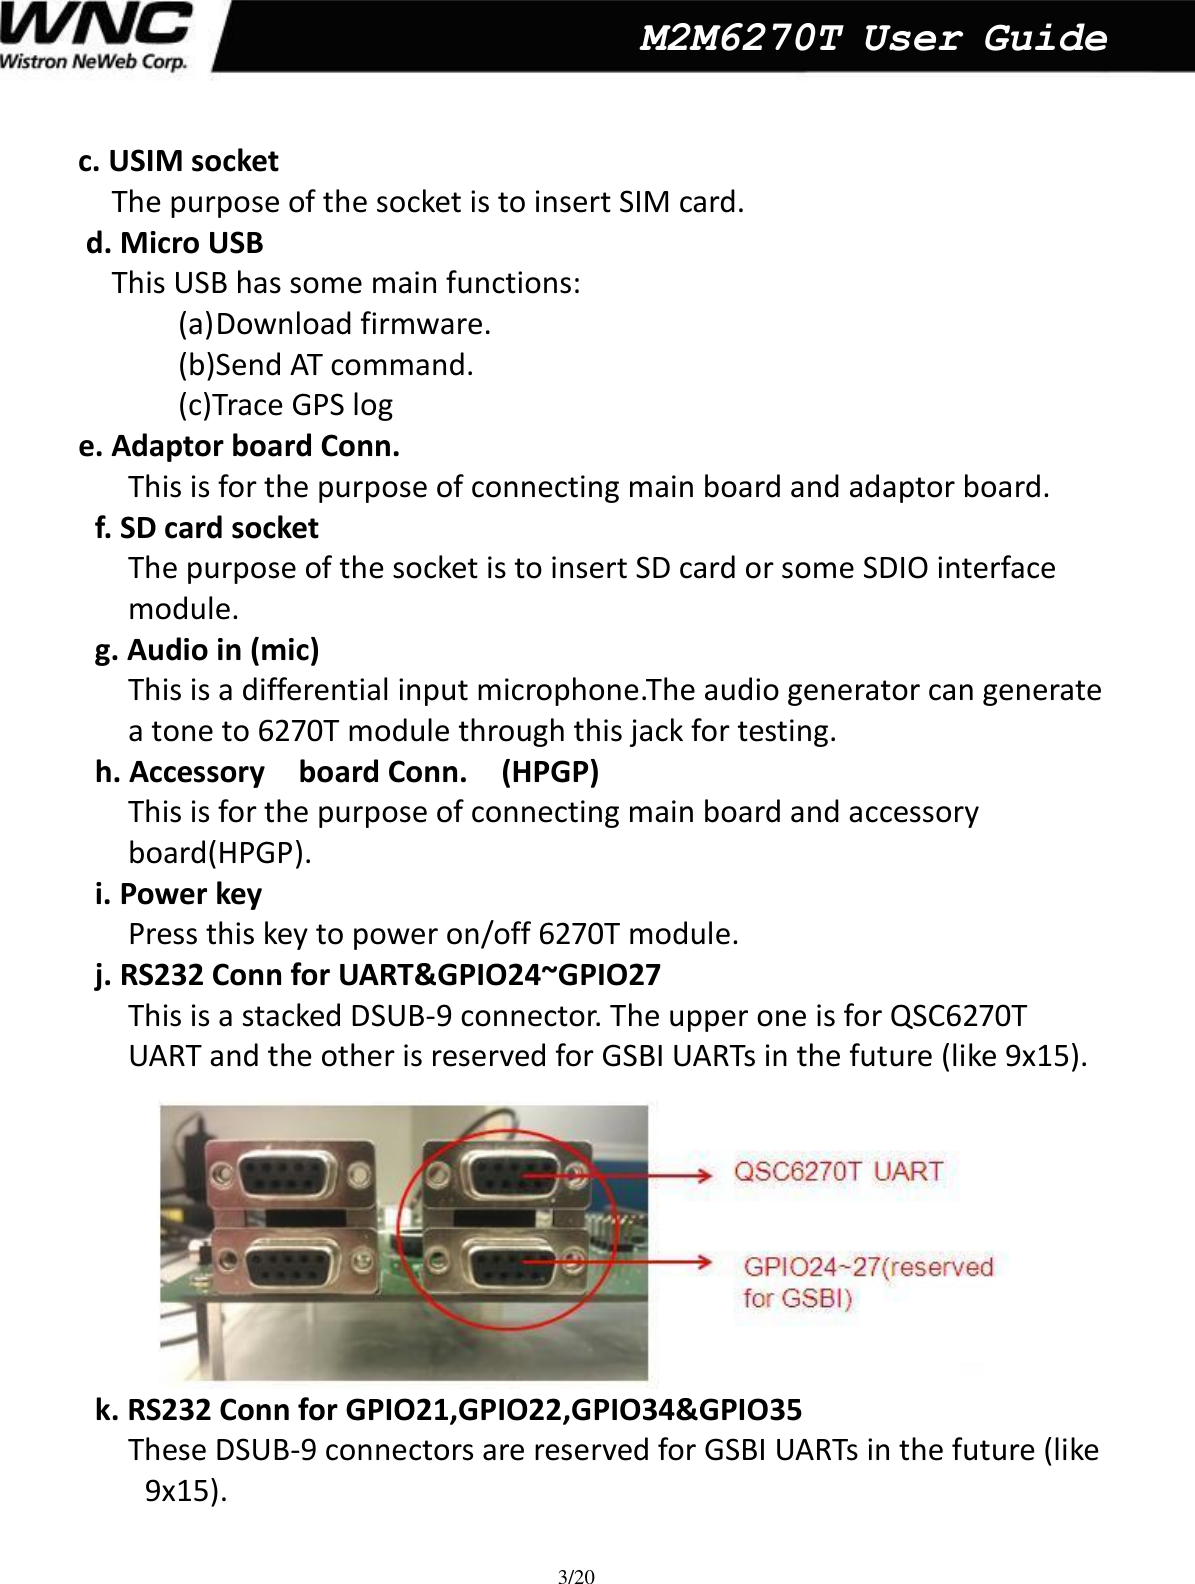  3/20  M2M6270T User Guide c. USIM socket   The purpose of the socket is to insert SIM card.      d. Micro USB   This USB has some main functions:   (a) Download firmware.   (b)Send AT command. (c)Trace GPS log     e. Adaptor board Conn.     This is for the purpose of connecting main board and adaptor board.   f. SD card socket   The purpose of the socket is to insert SD card or some SDIO interface   module.   g. Audio in (mic) This is a differential input microphone.The audio generator can generate   a tone to 6270T module through this jack for testing.  h. Accessory    board Conn.    (HPGP) This is for the purpose of connecting main board and accessory   board(HPGP).   i. Power key   Press this key to power on/off 6270T module.   j. RS232 Conn for UART&amp;GPIO24~GPIO27 This is a stacked DSUB-9 connector. The upper one is for QSC6270T   UART and the other is reserved for GSBI UARTs in the future (like 9x15).  k. RS232 Conn for GPIO21,GPIO22,GPIO34&amp;GPIO35 These DSUB-9 connectors are reserved for GSBI UARTs in the future (like   9x15).      